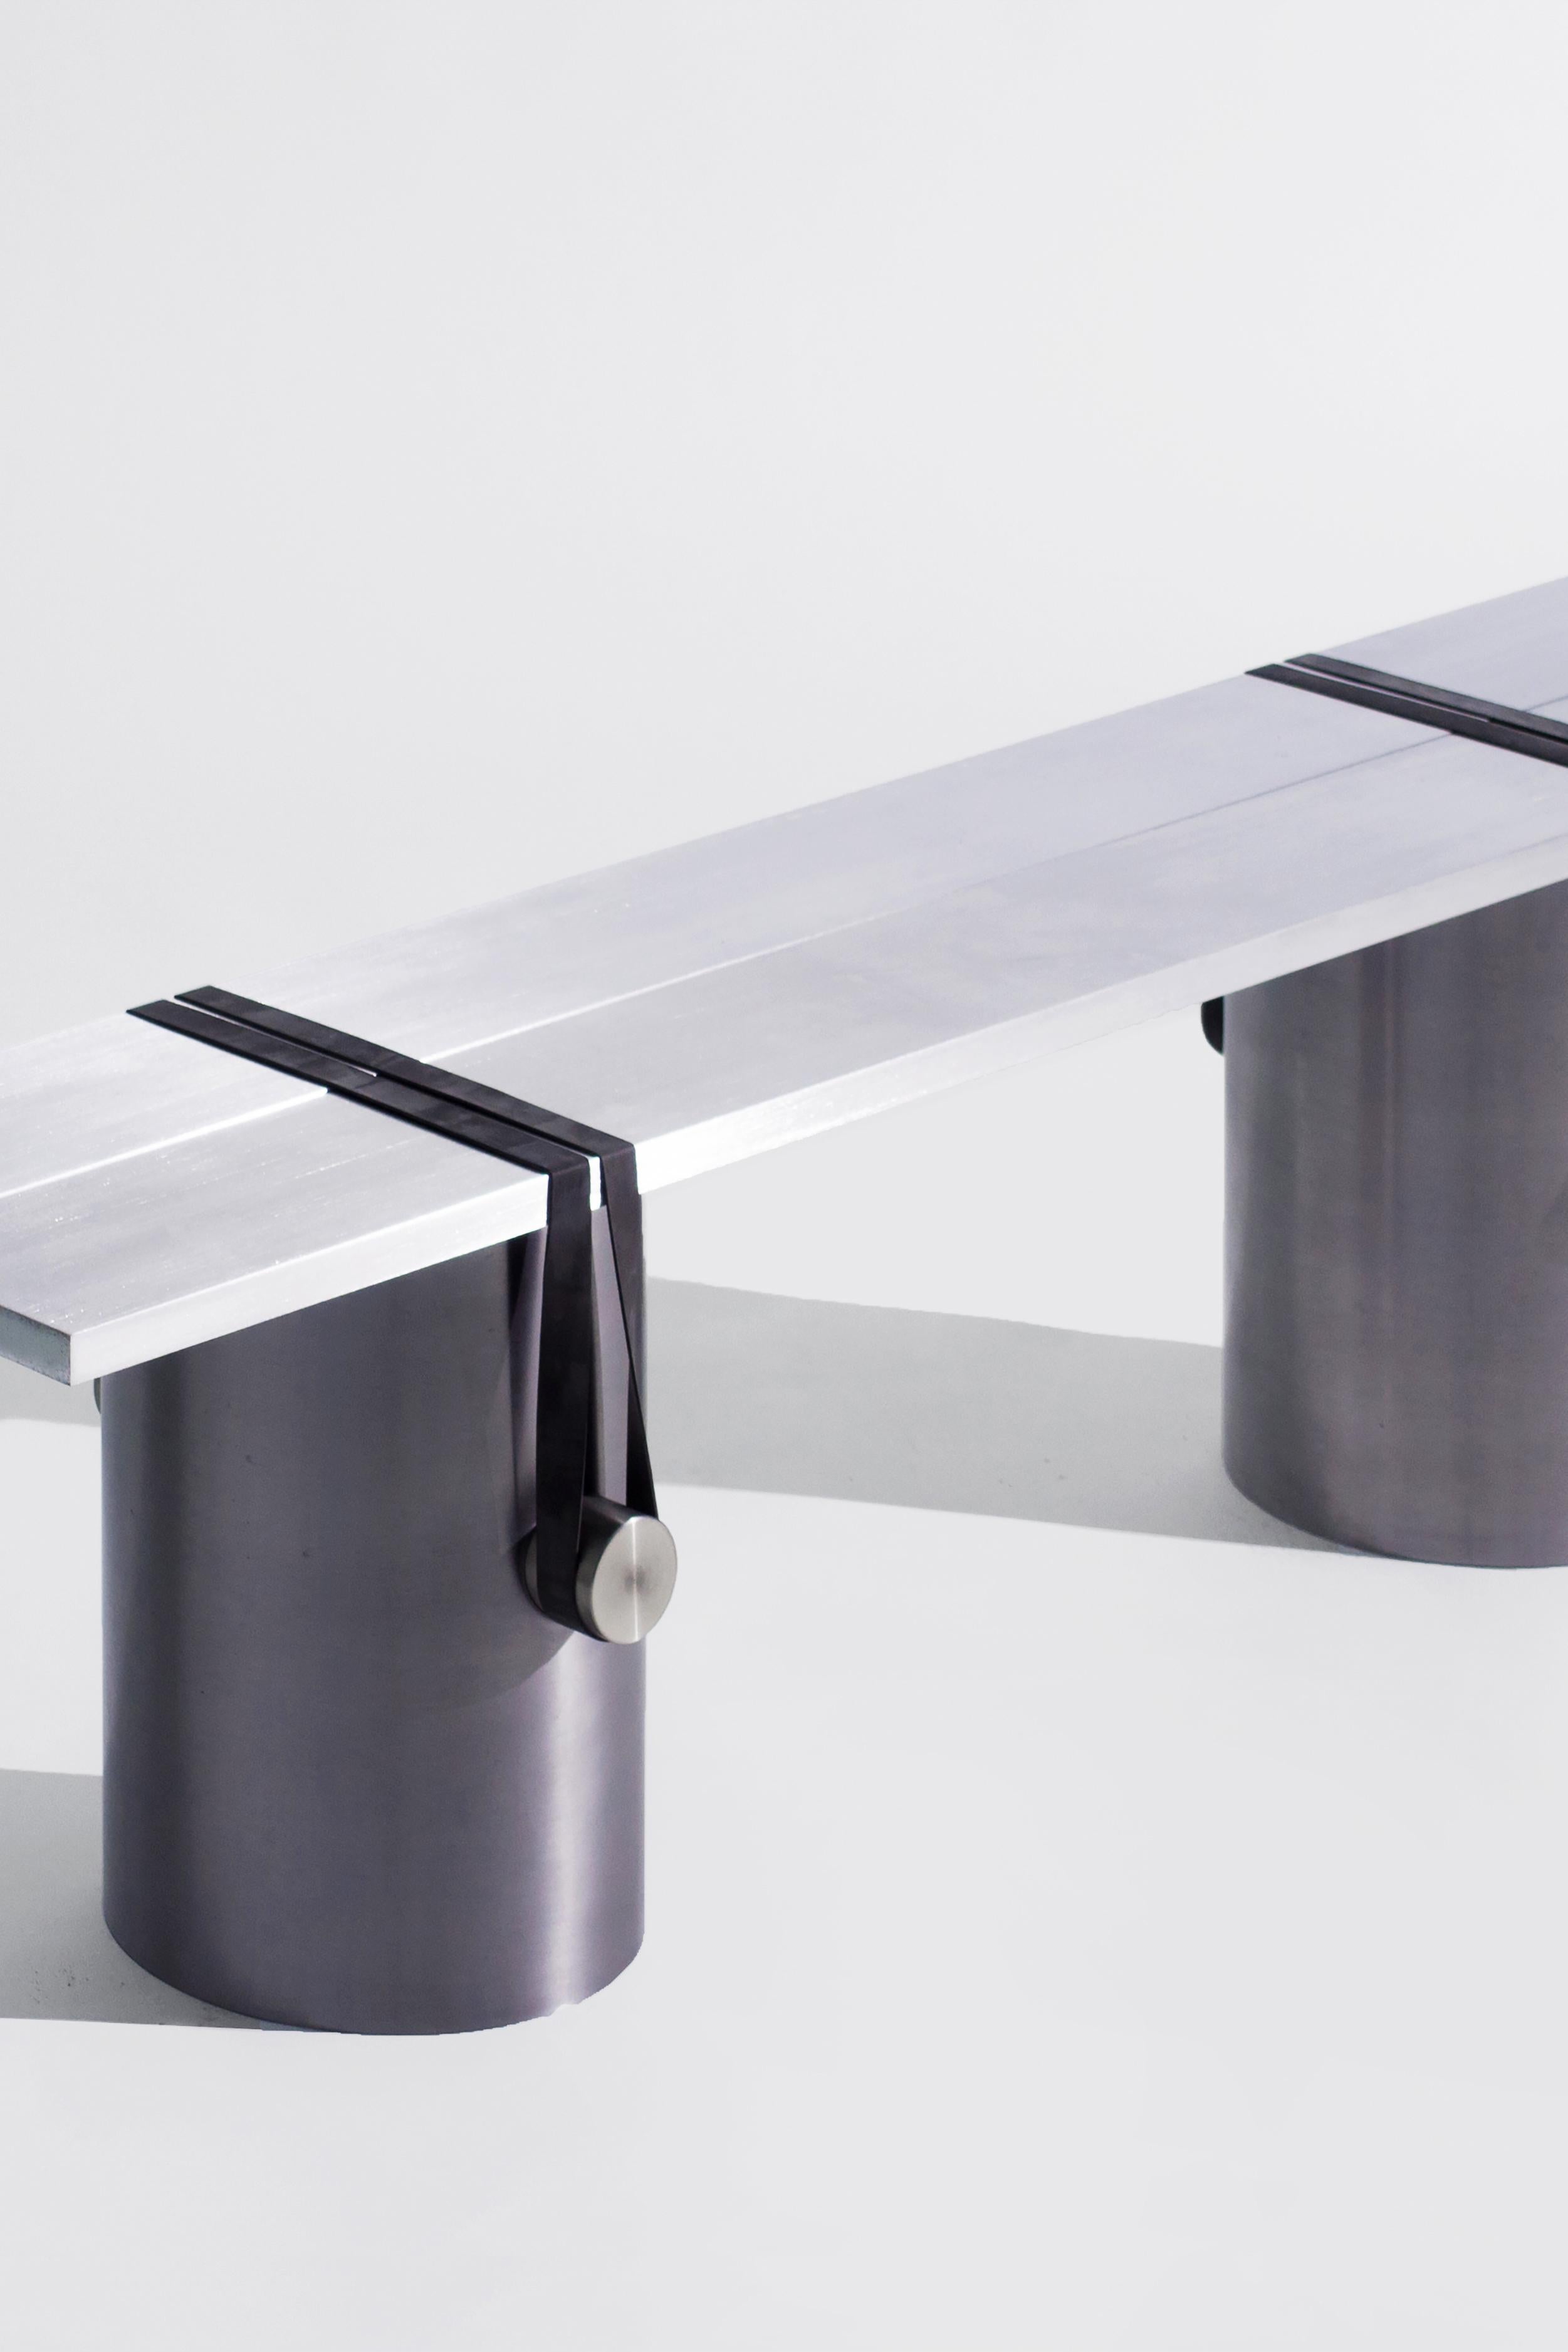 Anodised Contemporary Bench by Johan Viladrich 3